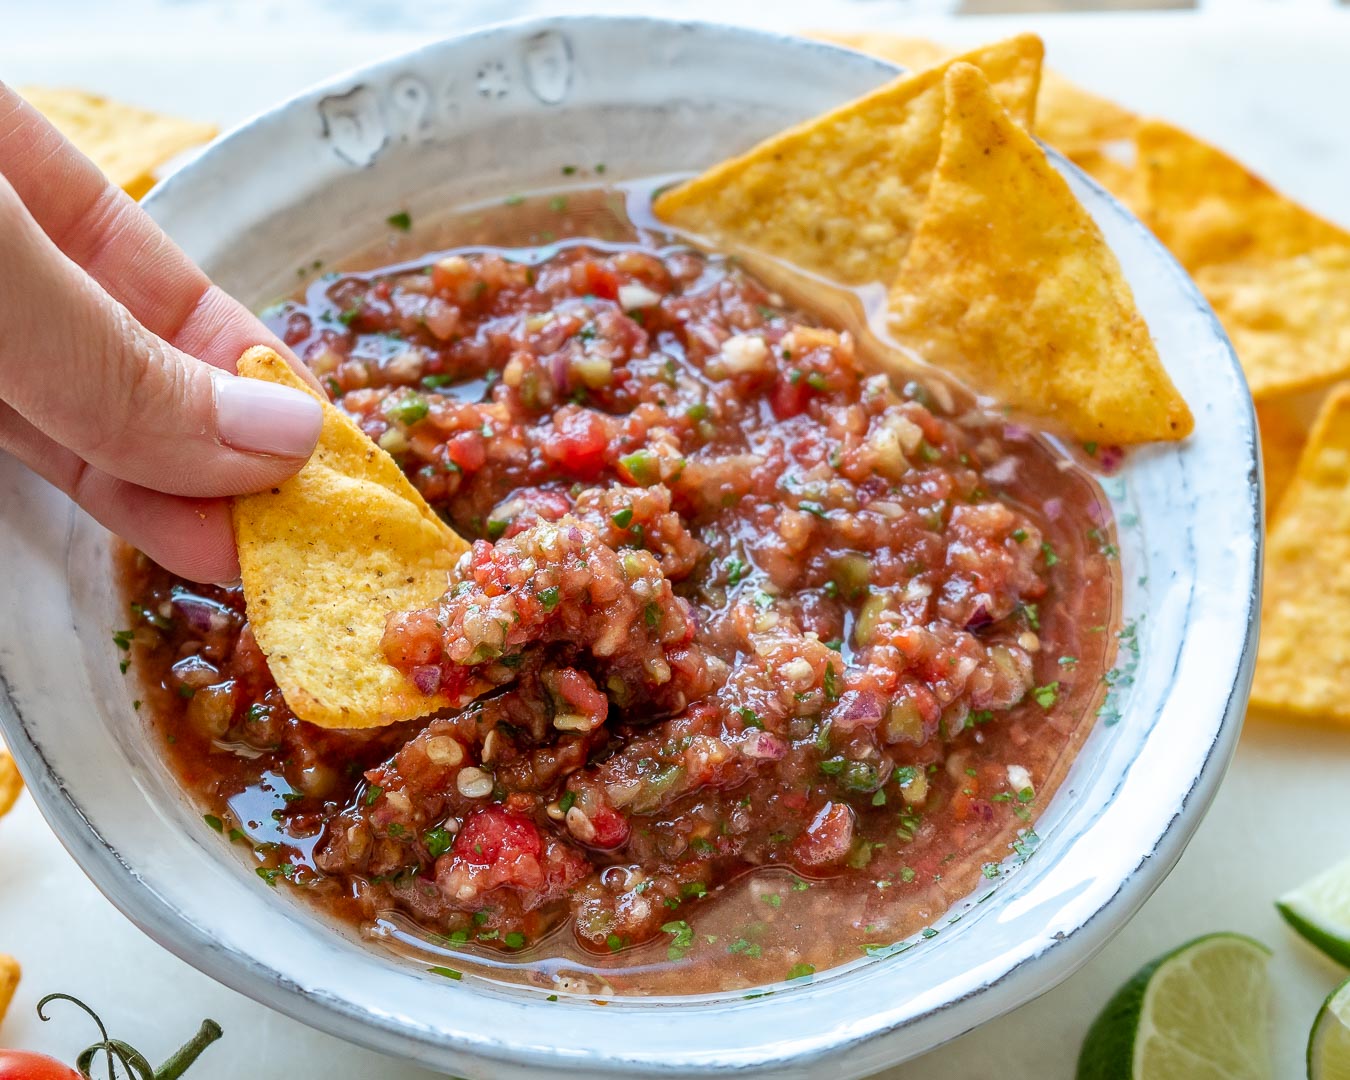 https://cleanfoodcrush.com/wp-content/uploads/2020/08/Quick-Easy-Homemade-Salsa-Clean-Food-Crush-Printable-Healthy-Recipe.jpg